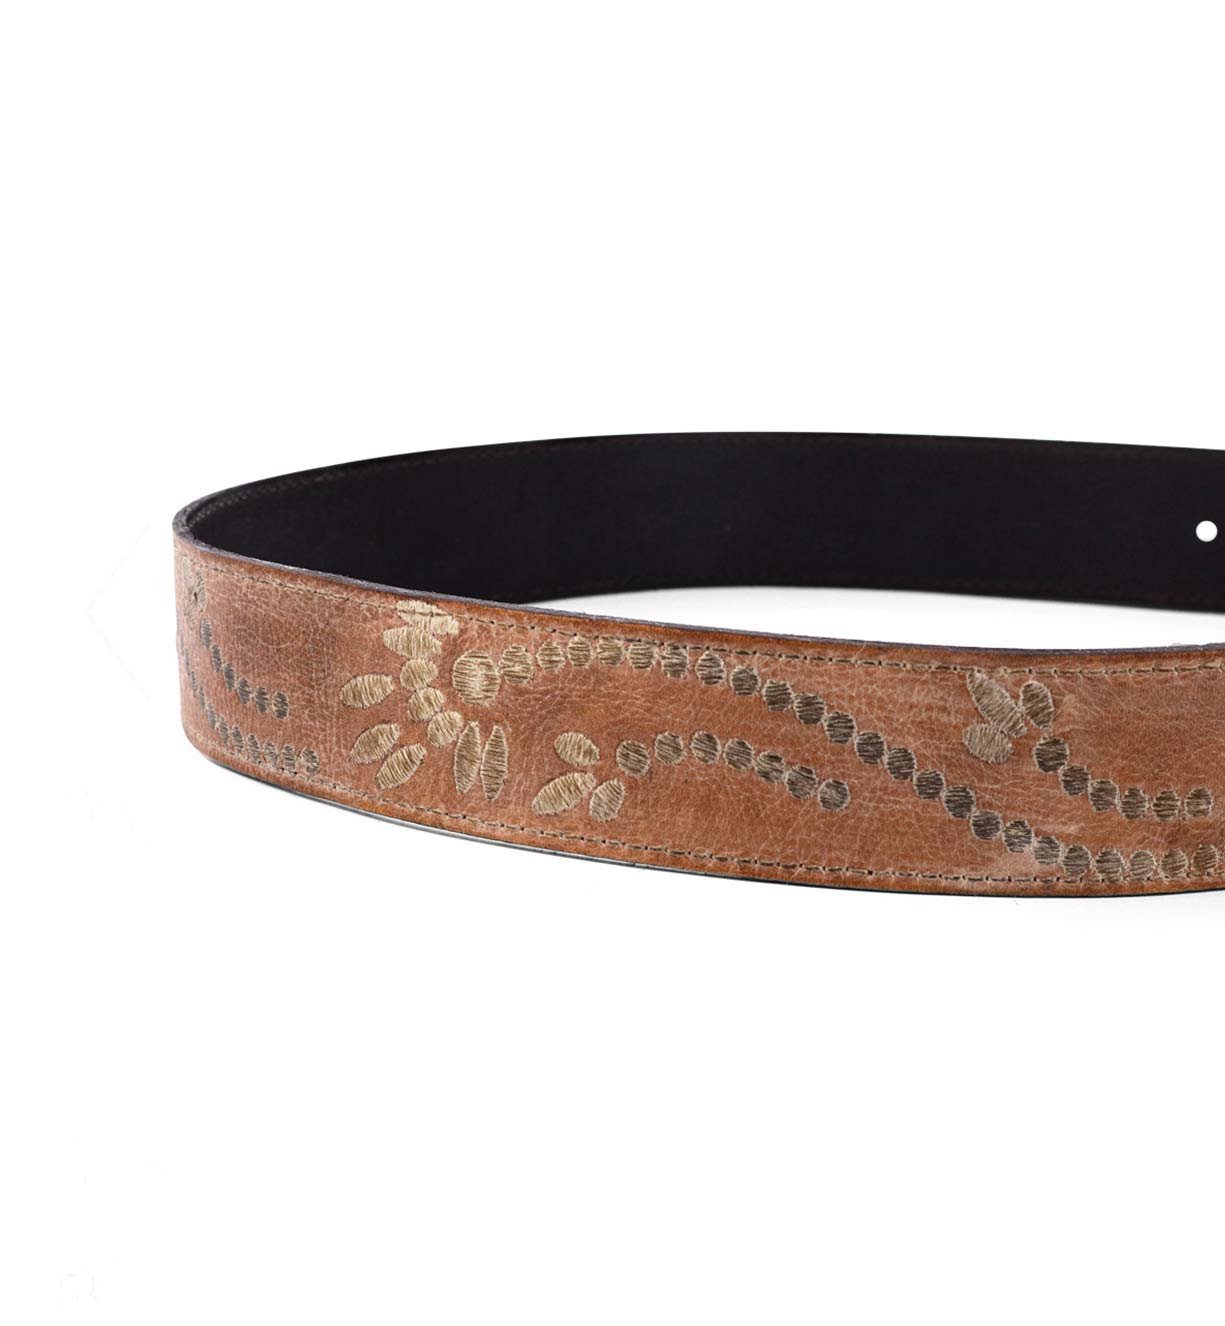 A Mohawk belt with a floral design on it by Bed Stu.